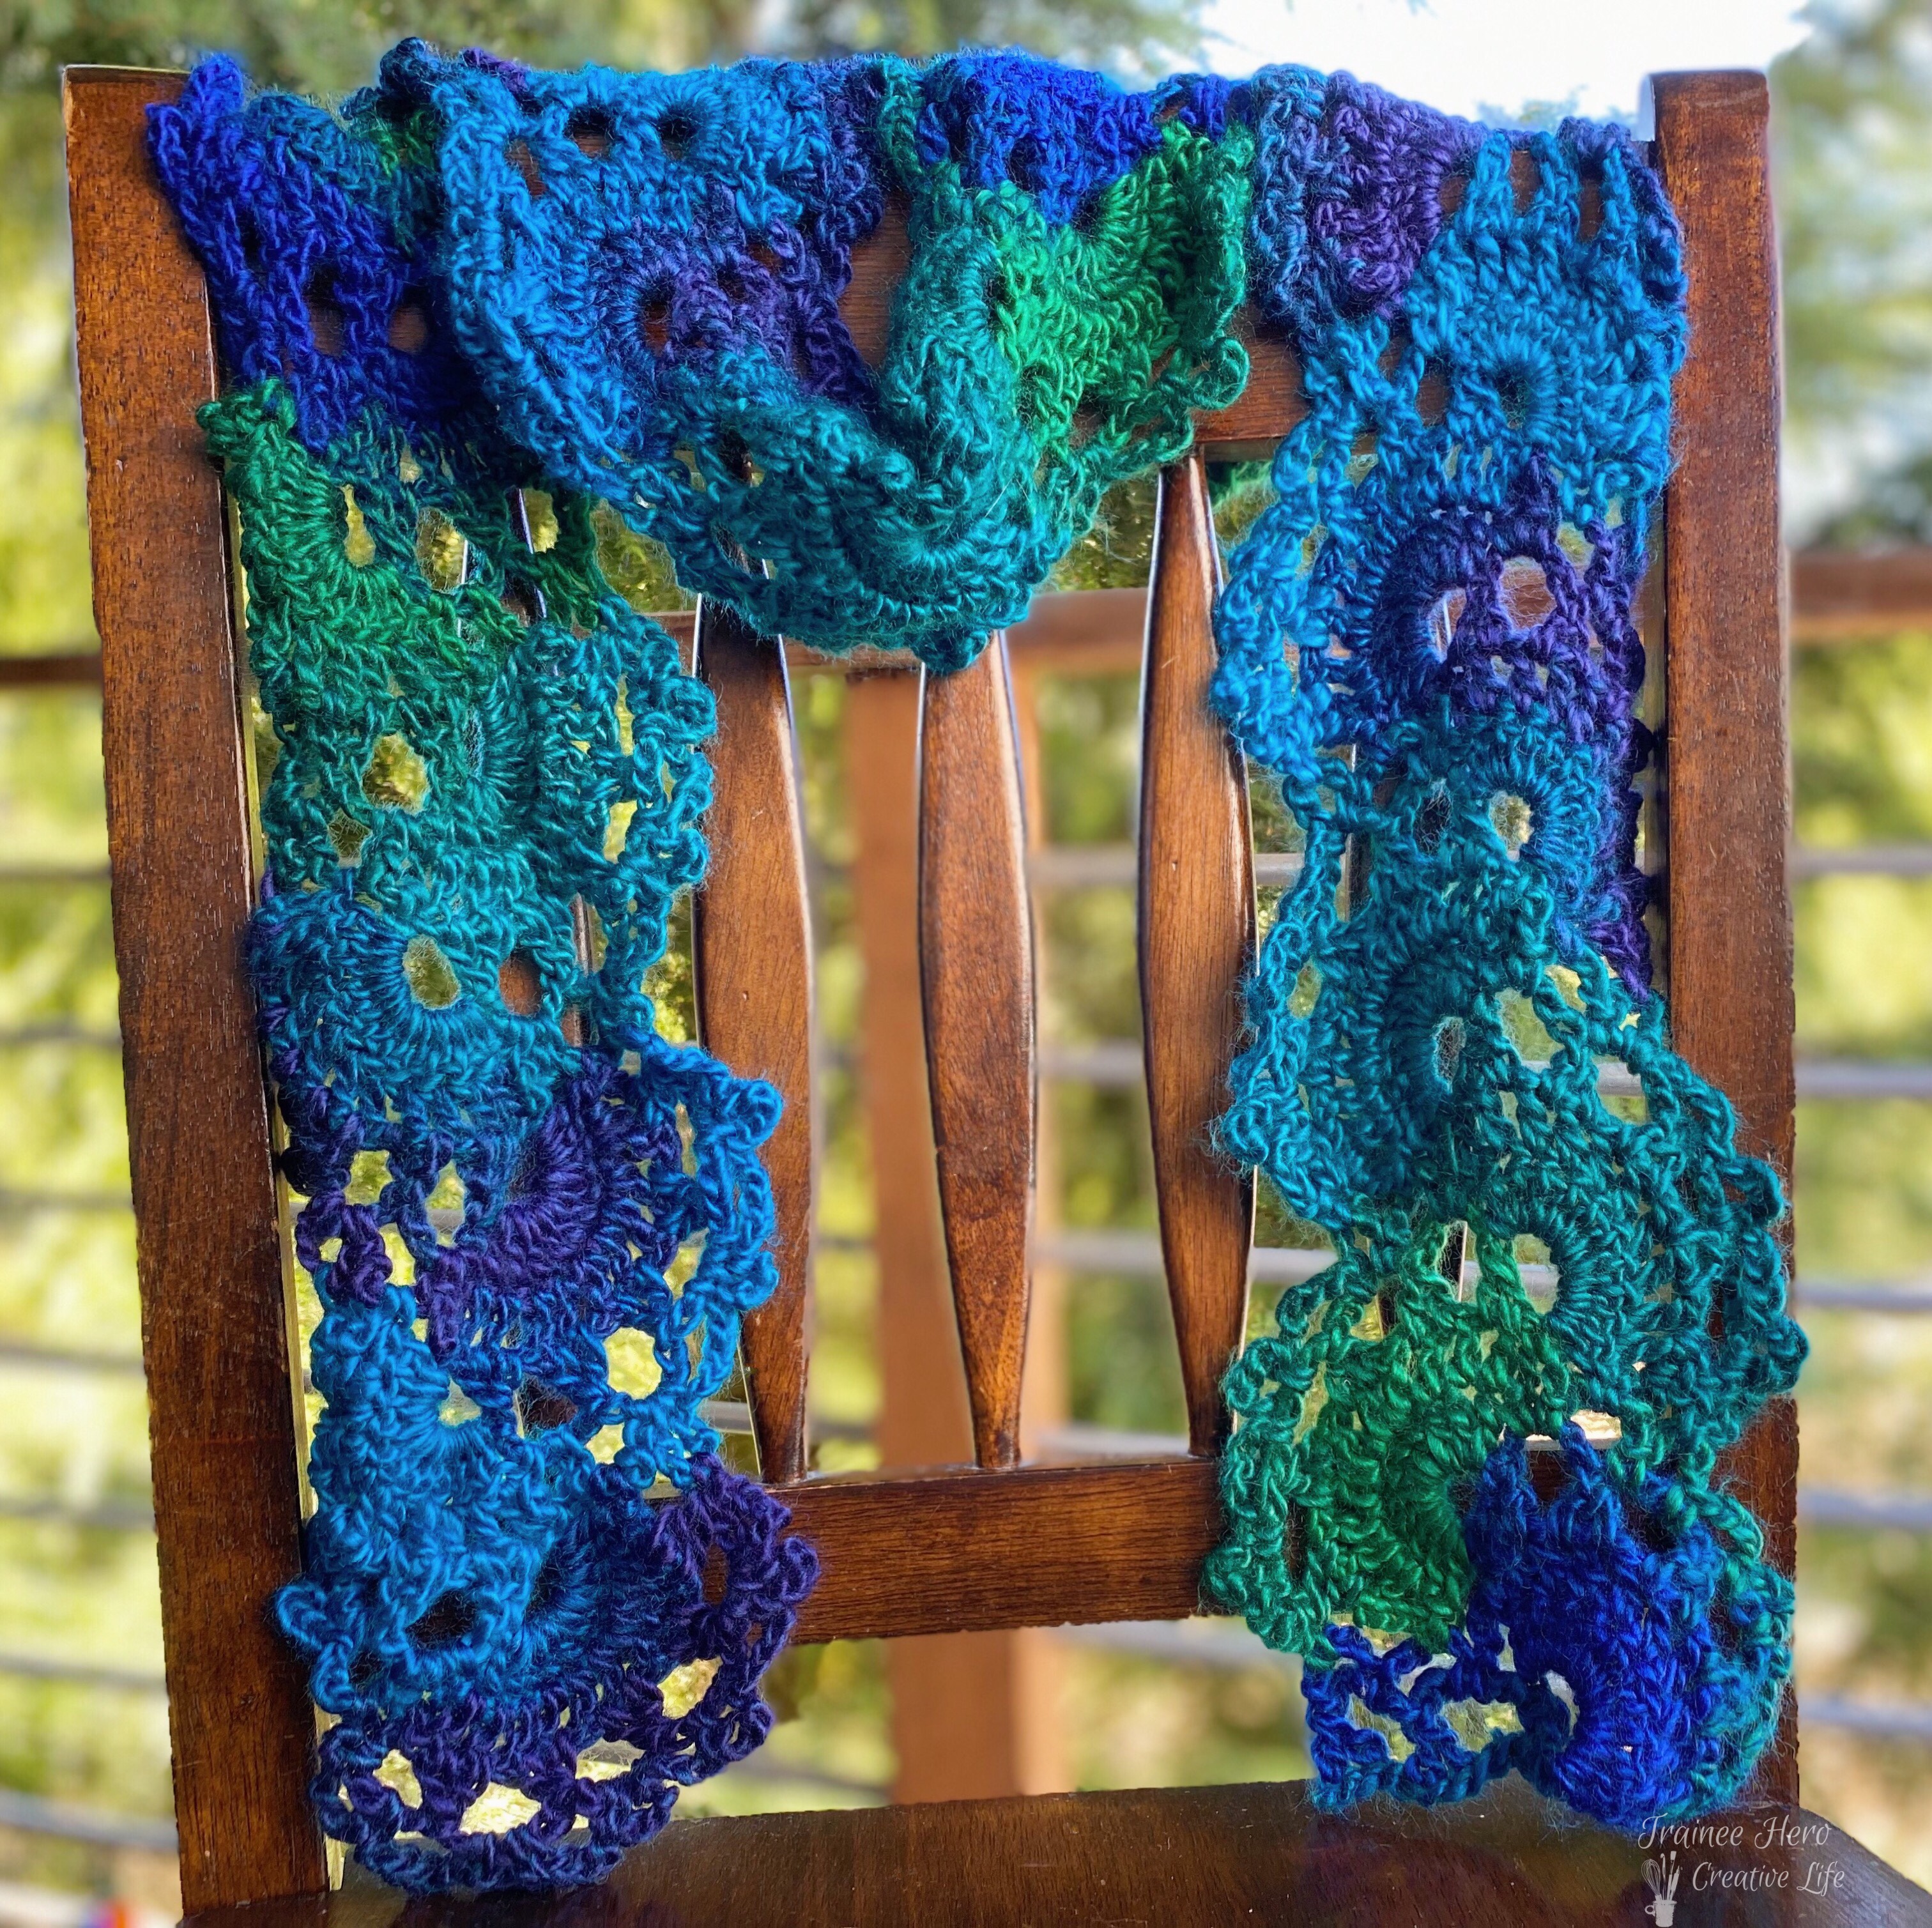 Zinnia Scarf, a crochet edging pattern scarf, draped over a chair.
